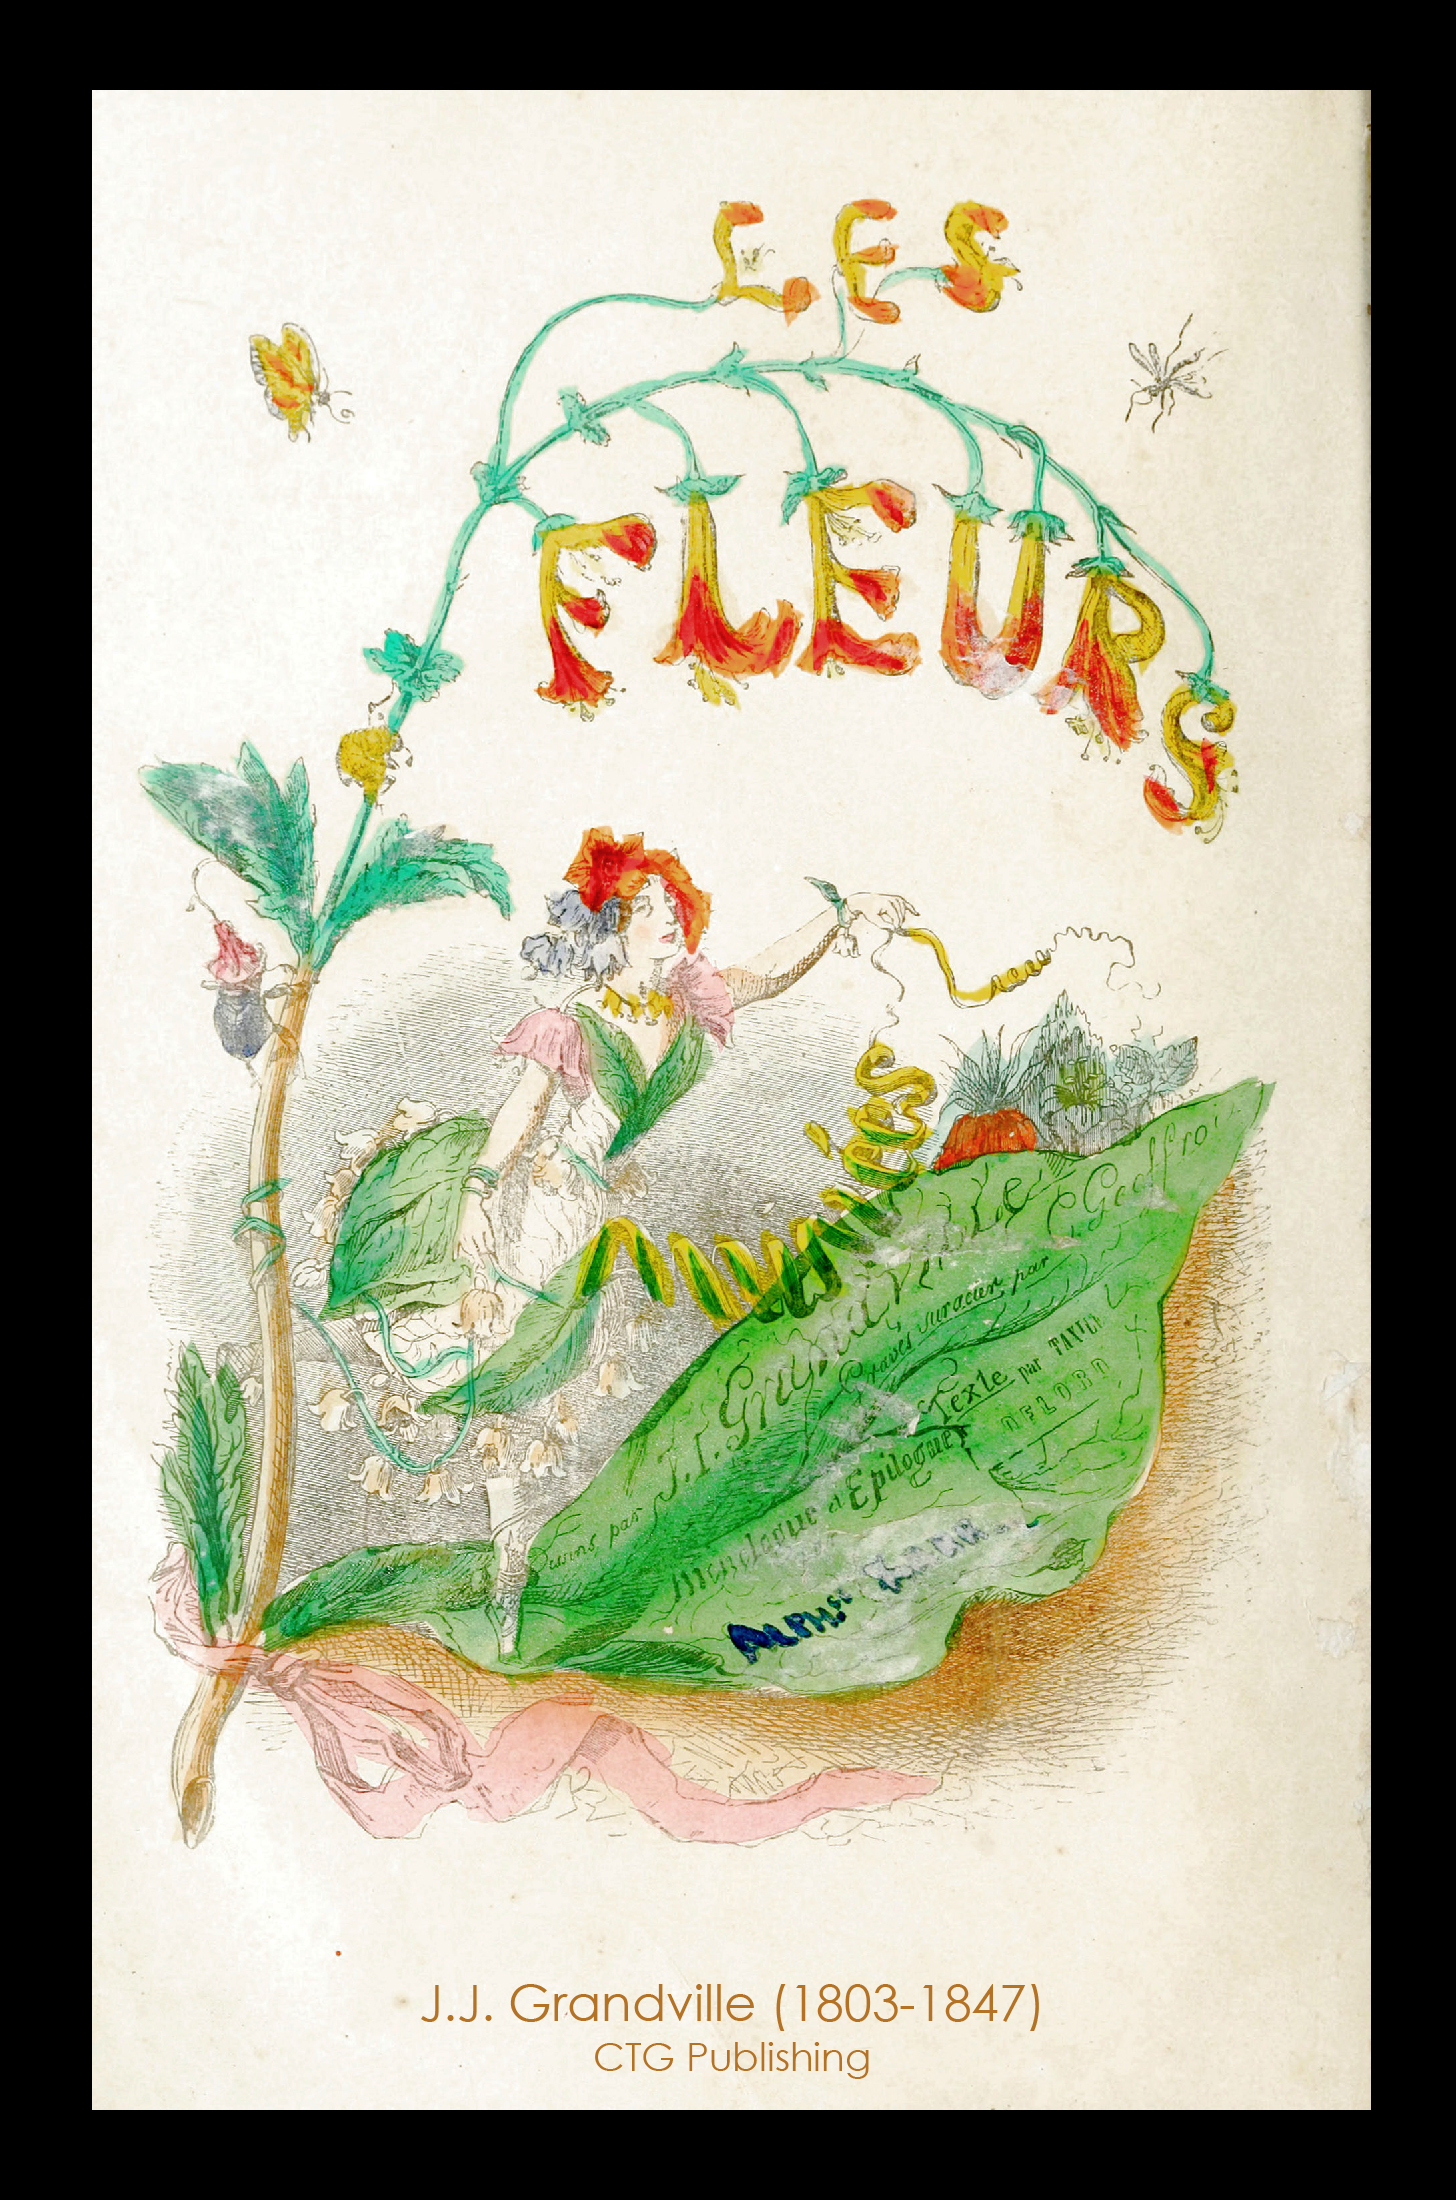 Les Fleurs Animees Frontispiece From J. J. Grandville's Animated Flowers